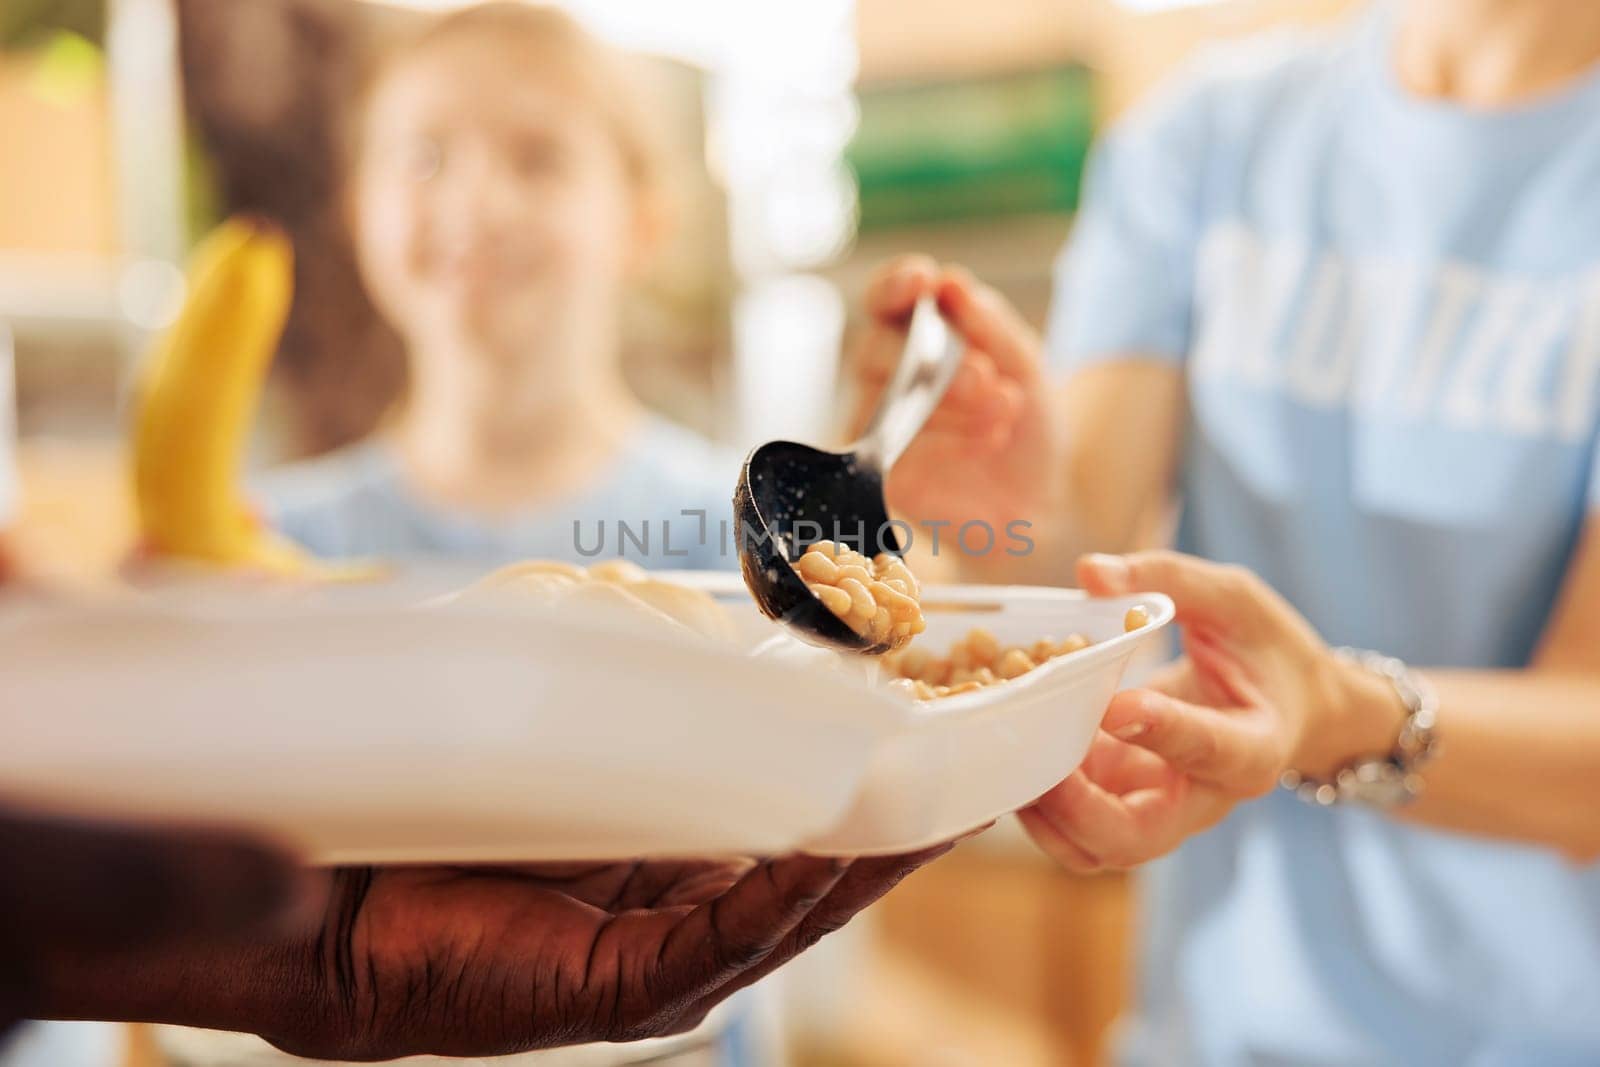 Photo focus on caucasian woman serving baked beans to hungry underprivileged african american person at a non-profit food drive. Close-up shot of free food distribution by humanitarian aid team.